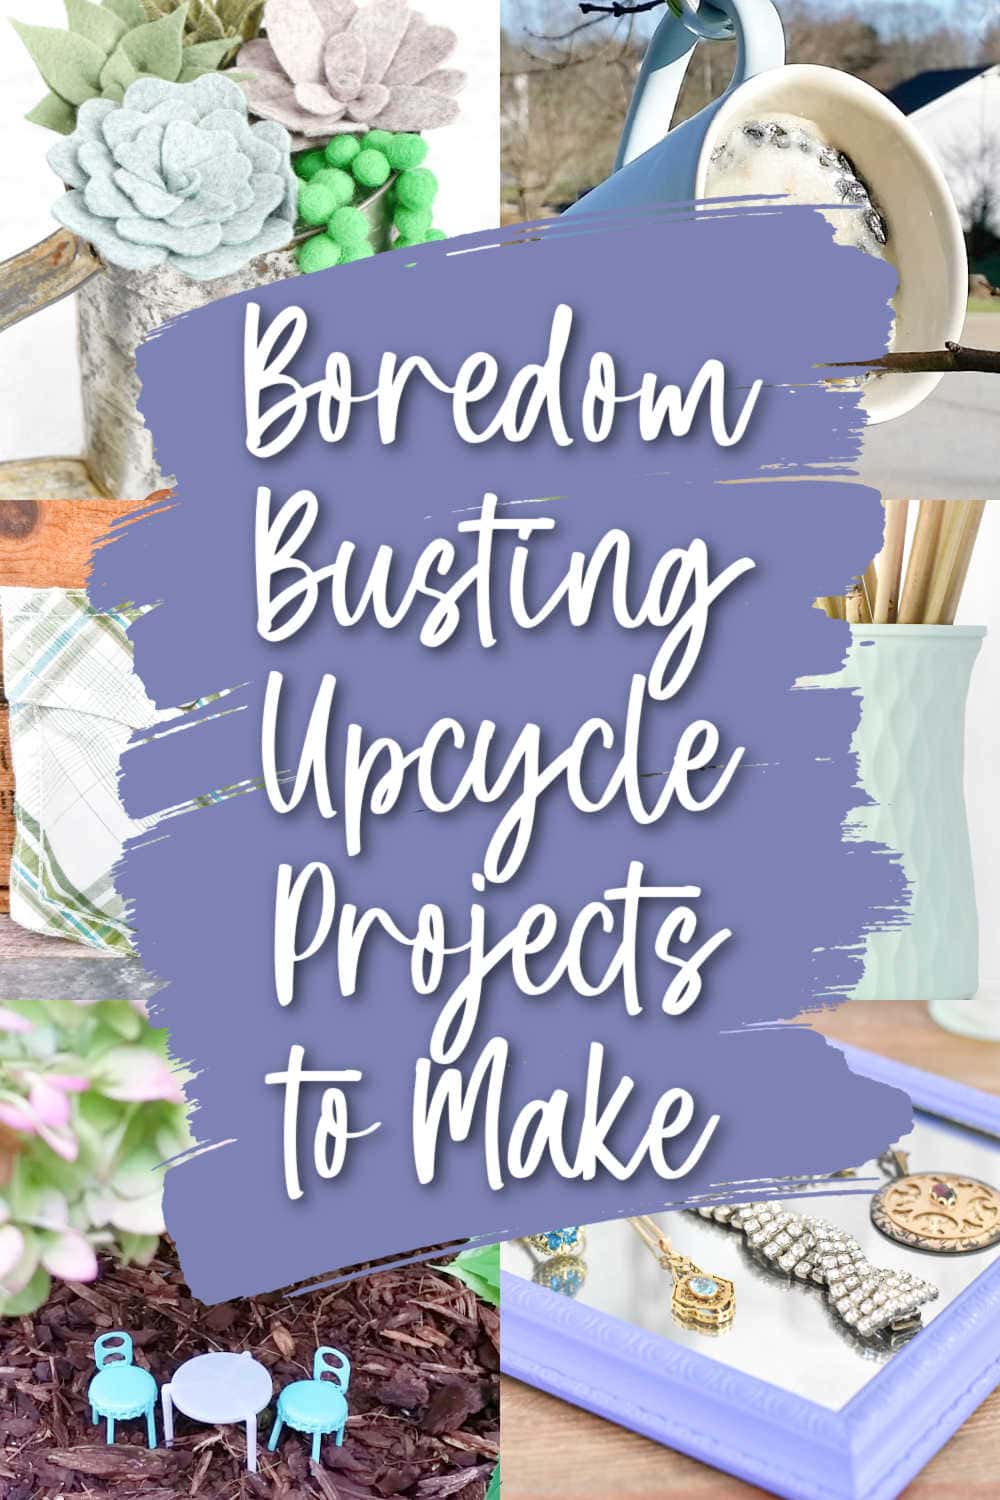 upcycle crafts and ideas